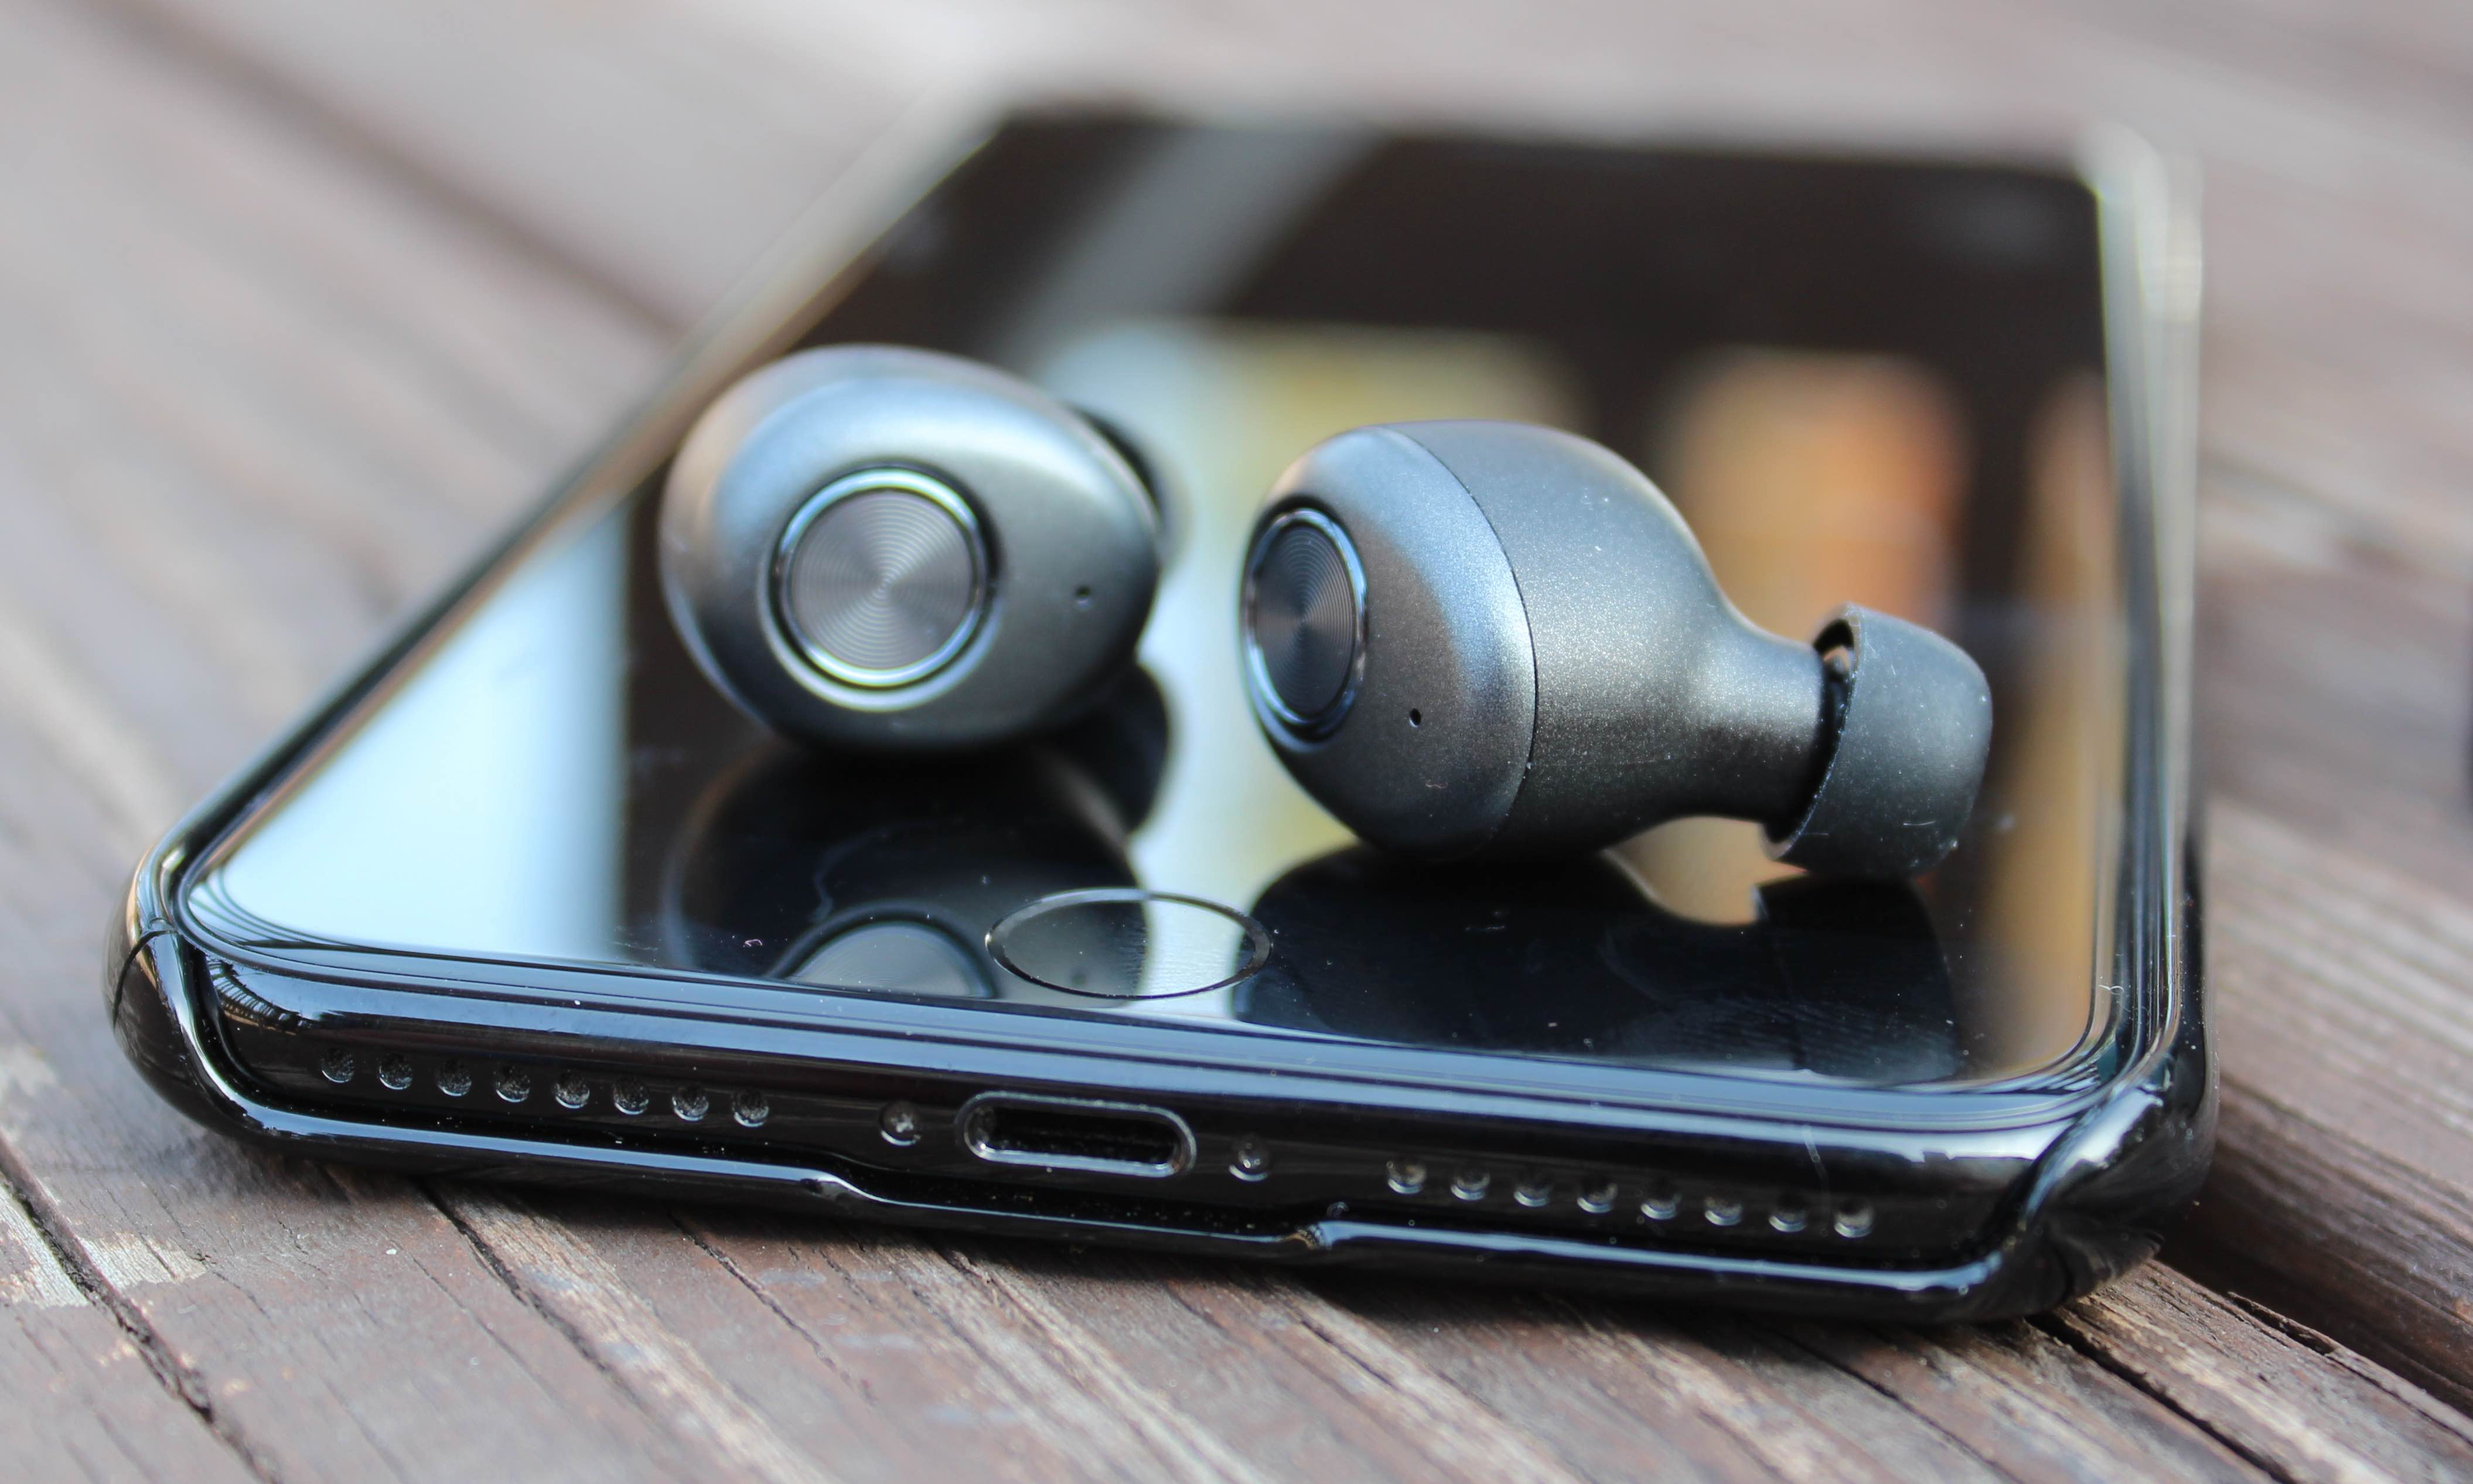 Review: Smartomi Ace – Affordable, Truly Wireless Earbuds